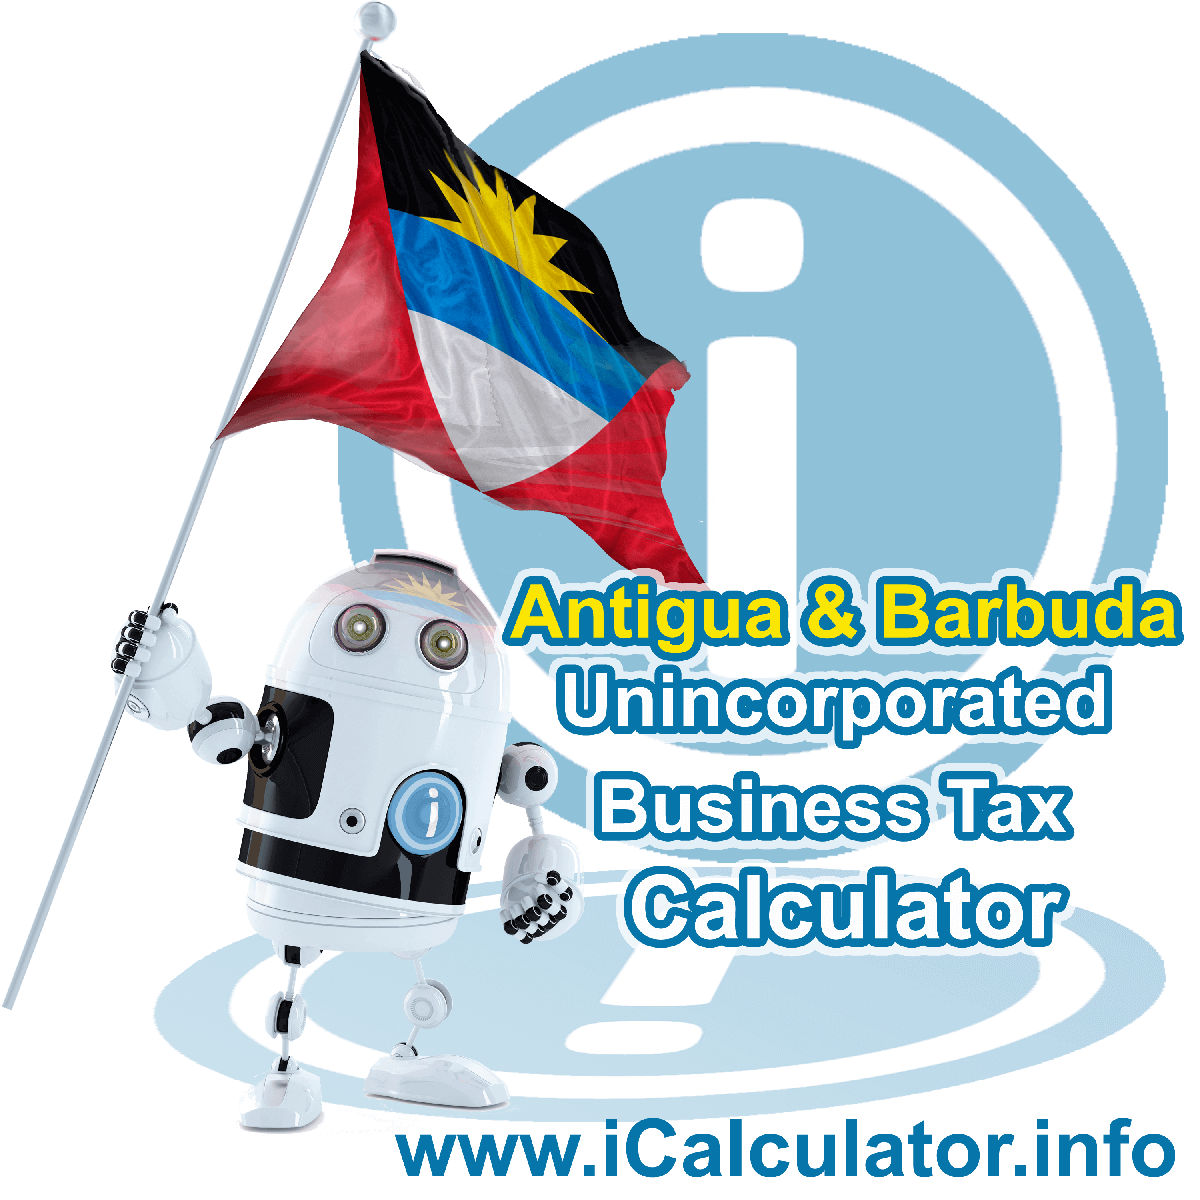 Antigua and Barbuda UBT Calculator 2023. This image shows the Antigua and Barbuda flag and information relating to the tax formula for the Antigua and Barbuda Unincorporated Business Tax Calculator